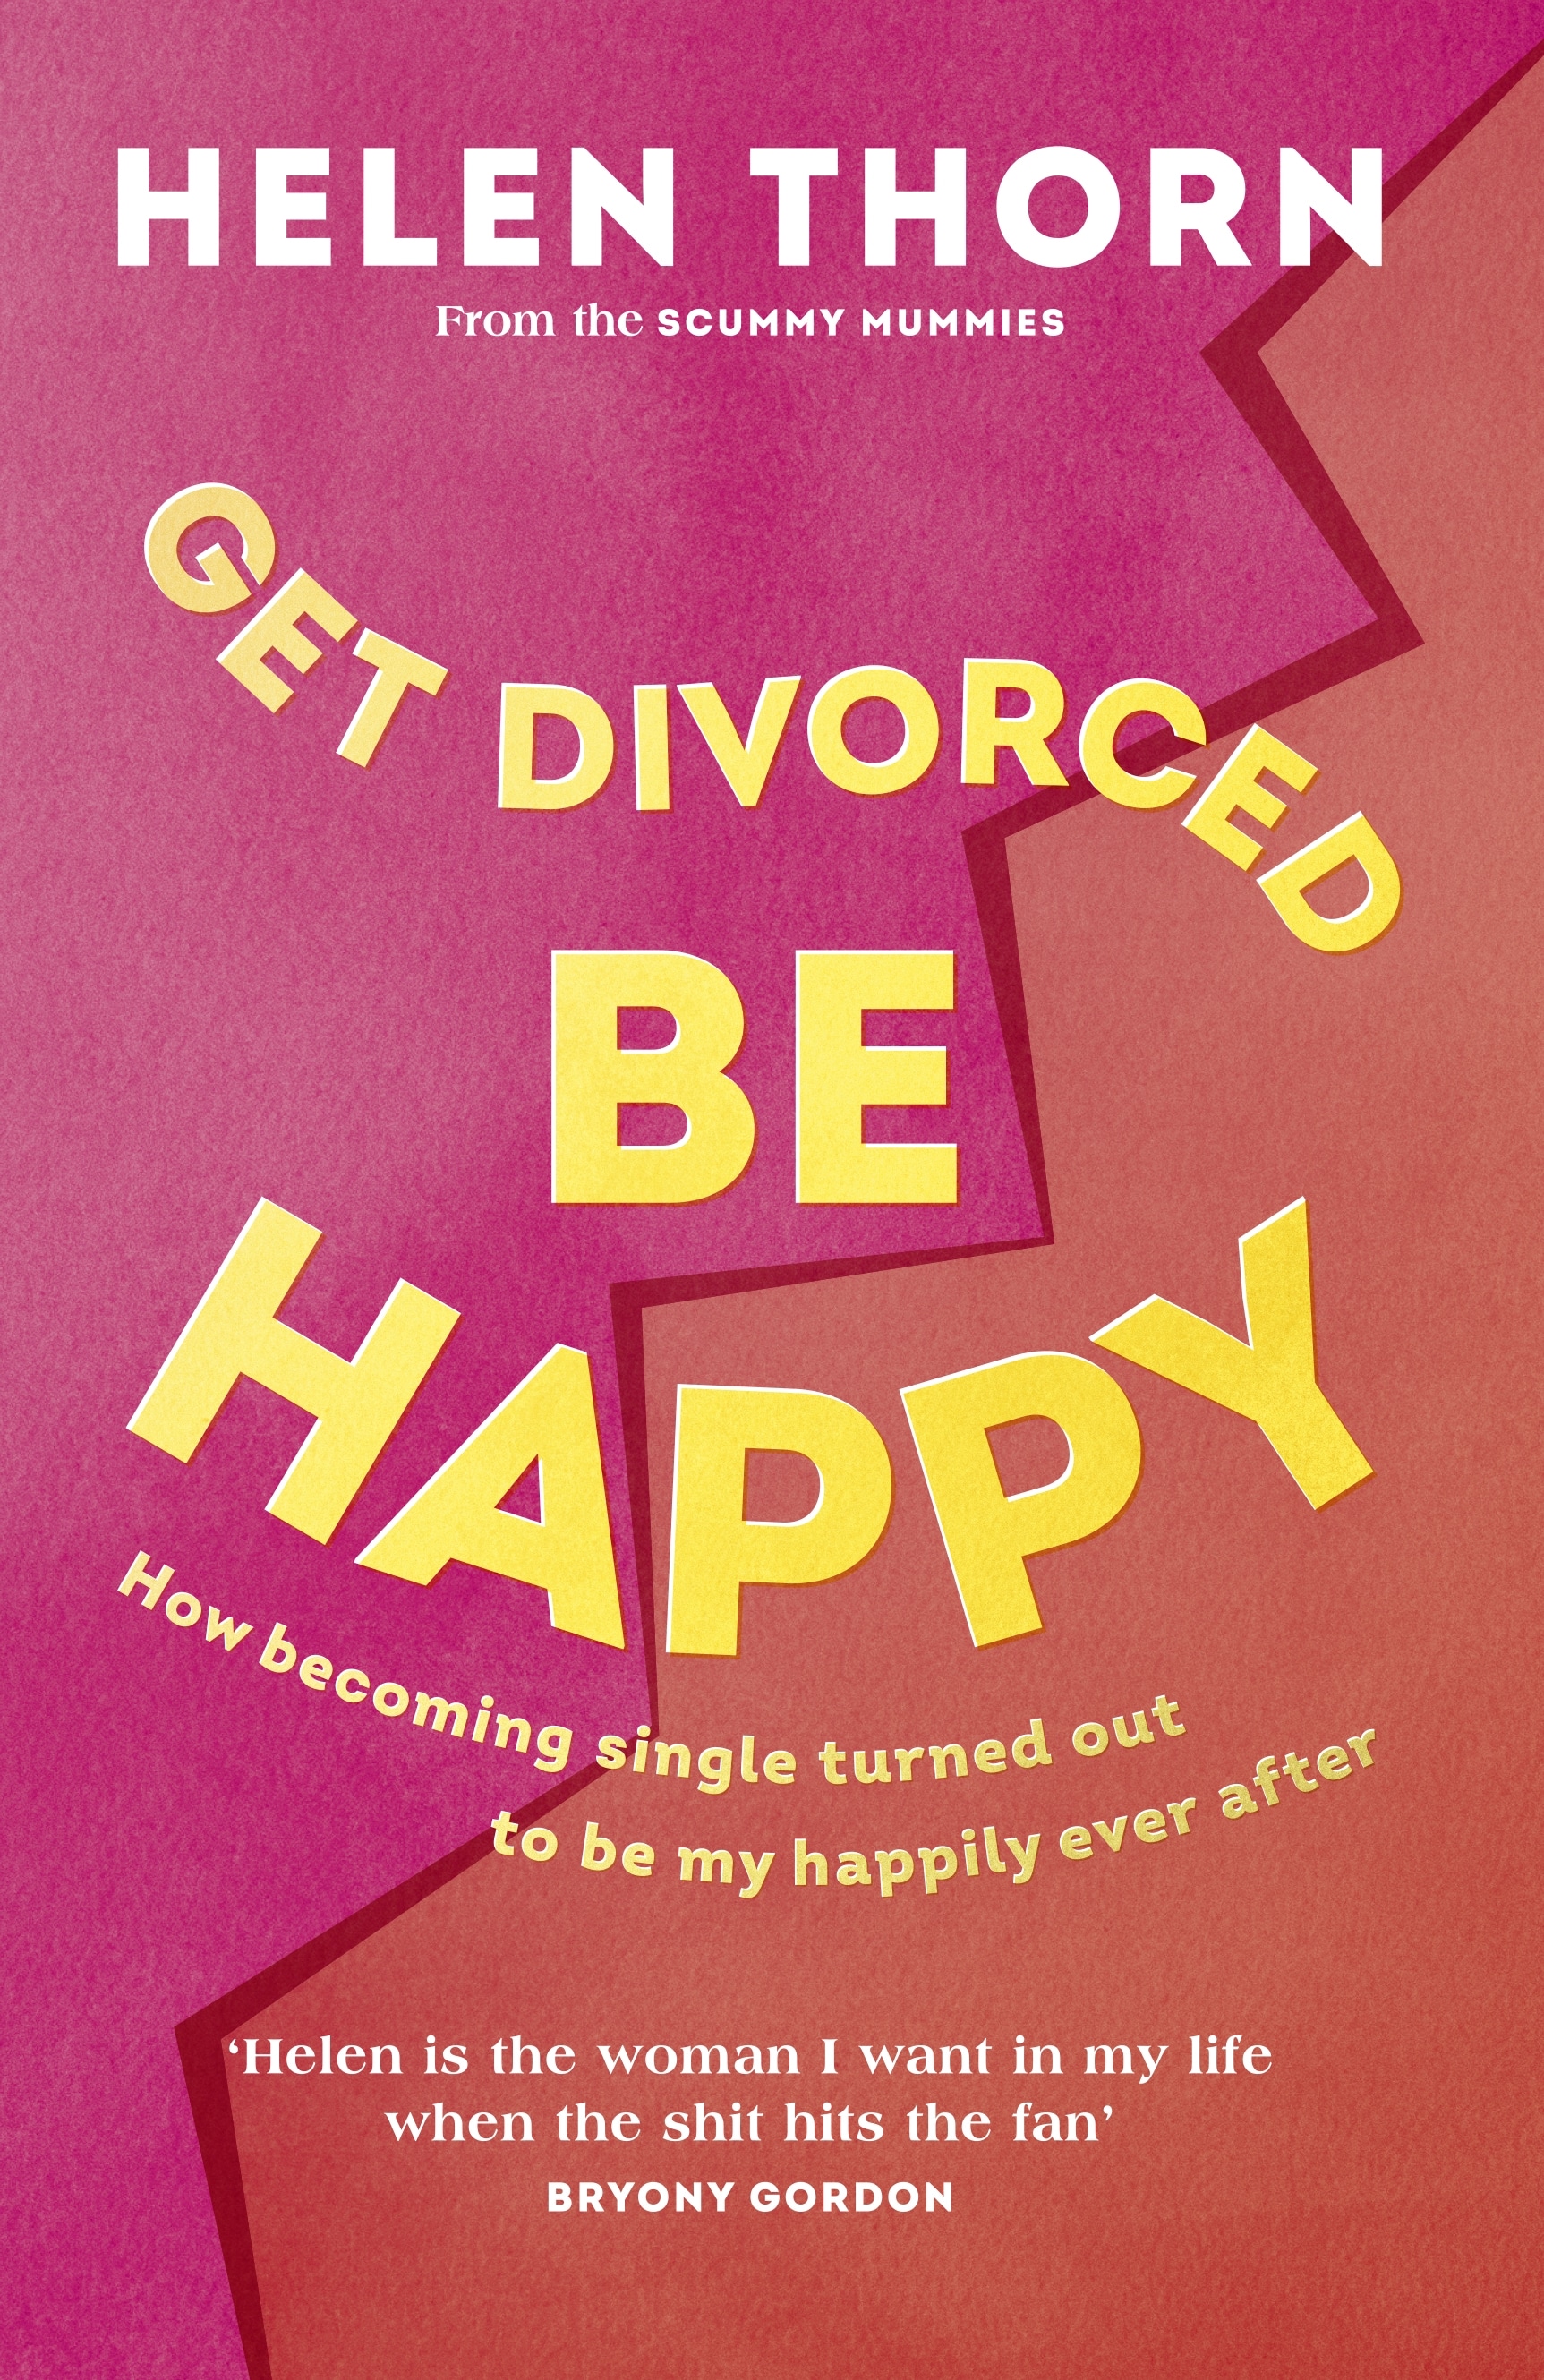 Book “Get Divorced, Be Happy” by Helen Thorn — July 29, 2021